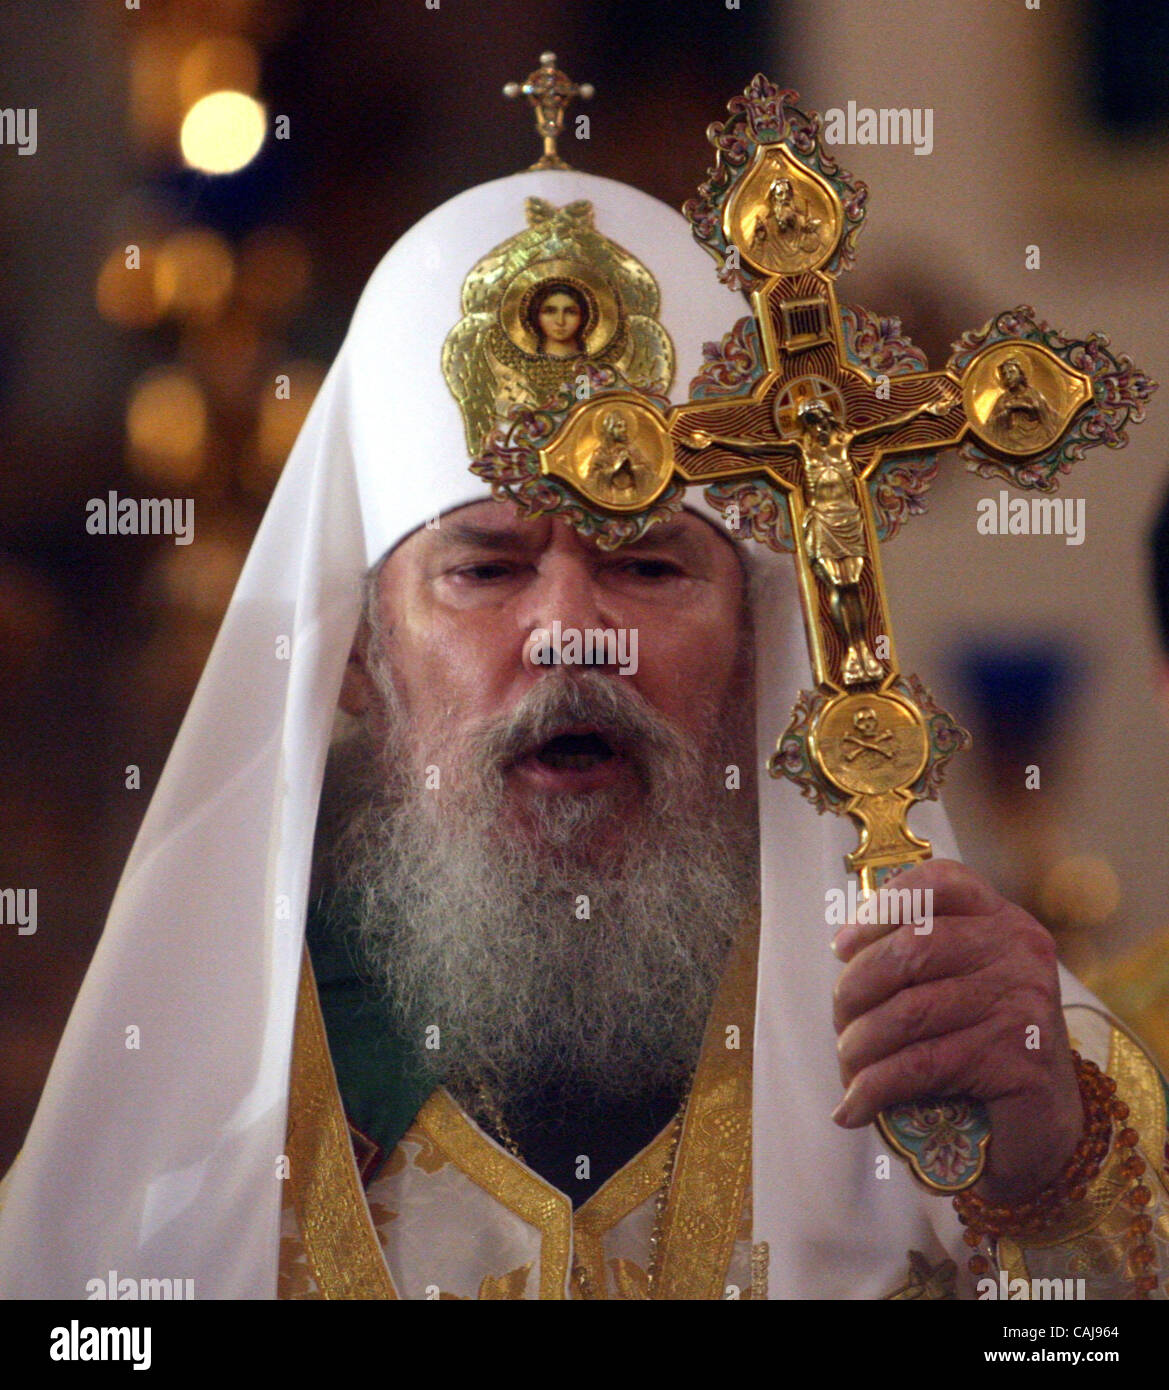 Patriarch Alexy II, who led the Russian Orthodox Church for 18 years, died at the age of 79 in his residency near the Russian capital on Friday morning, December 5th, 2008. Pictured: Patriarch of Moscow and All Russia Alexy II Stock Photo